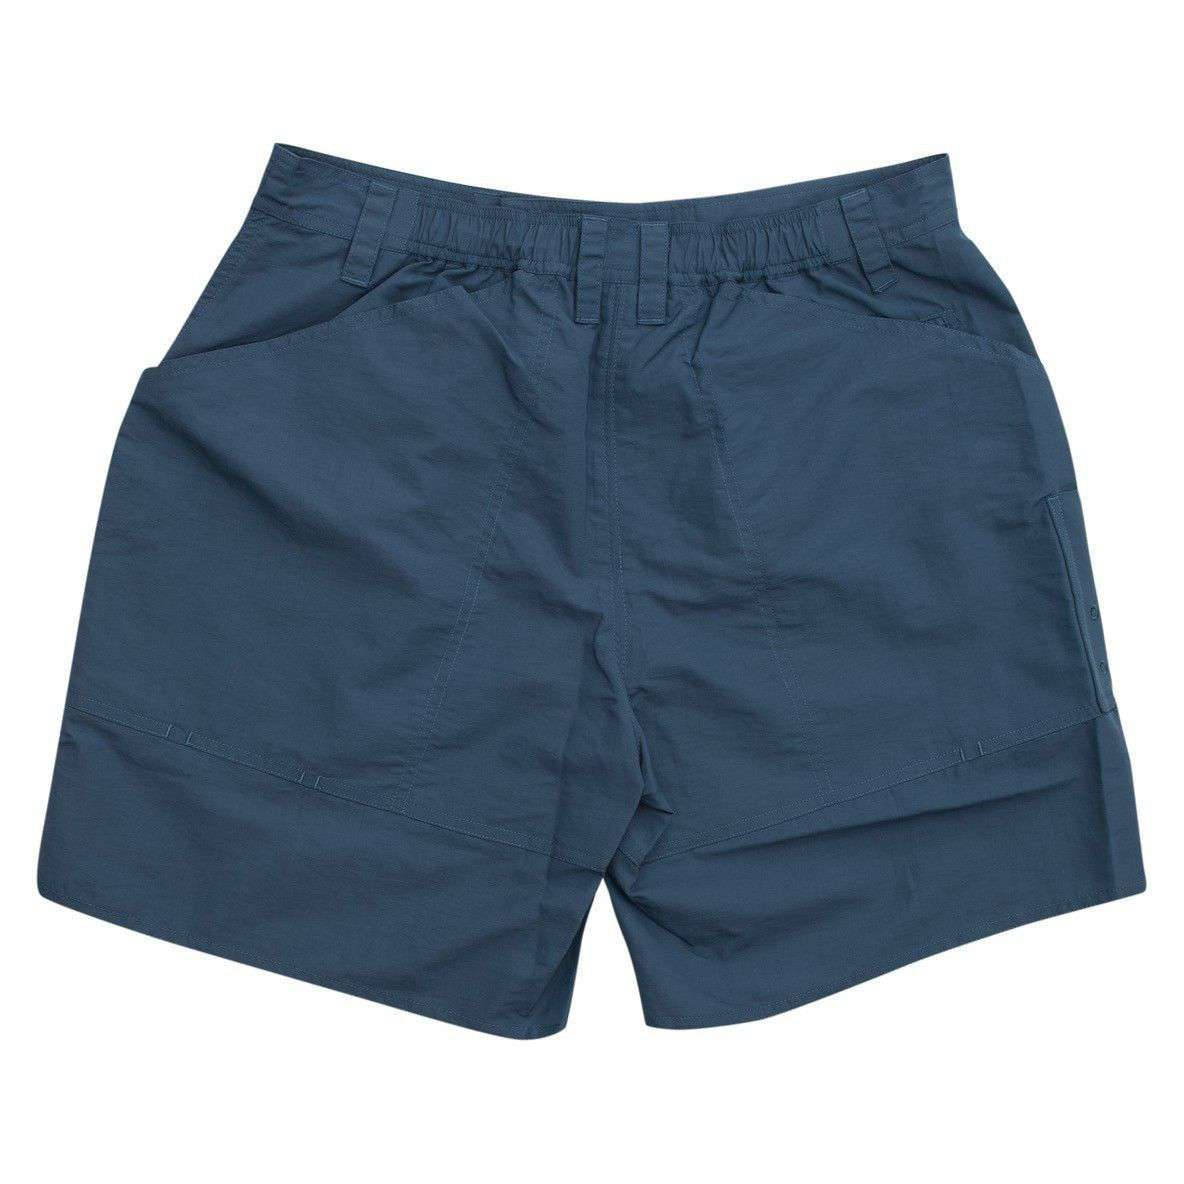 Cahaba Fishing Short in Indian Teal by The Southern Shirt Co. - Country Club Prep